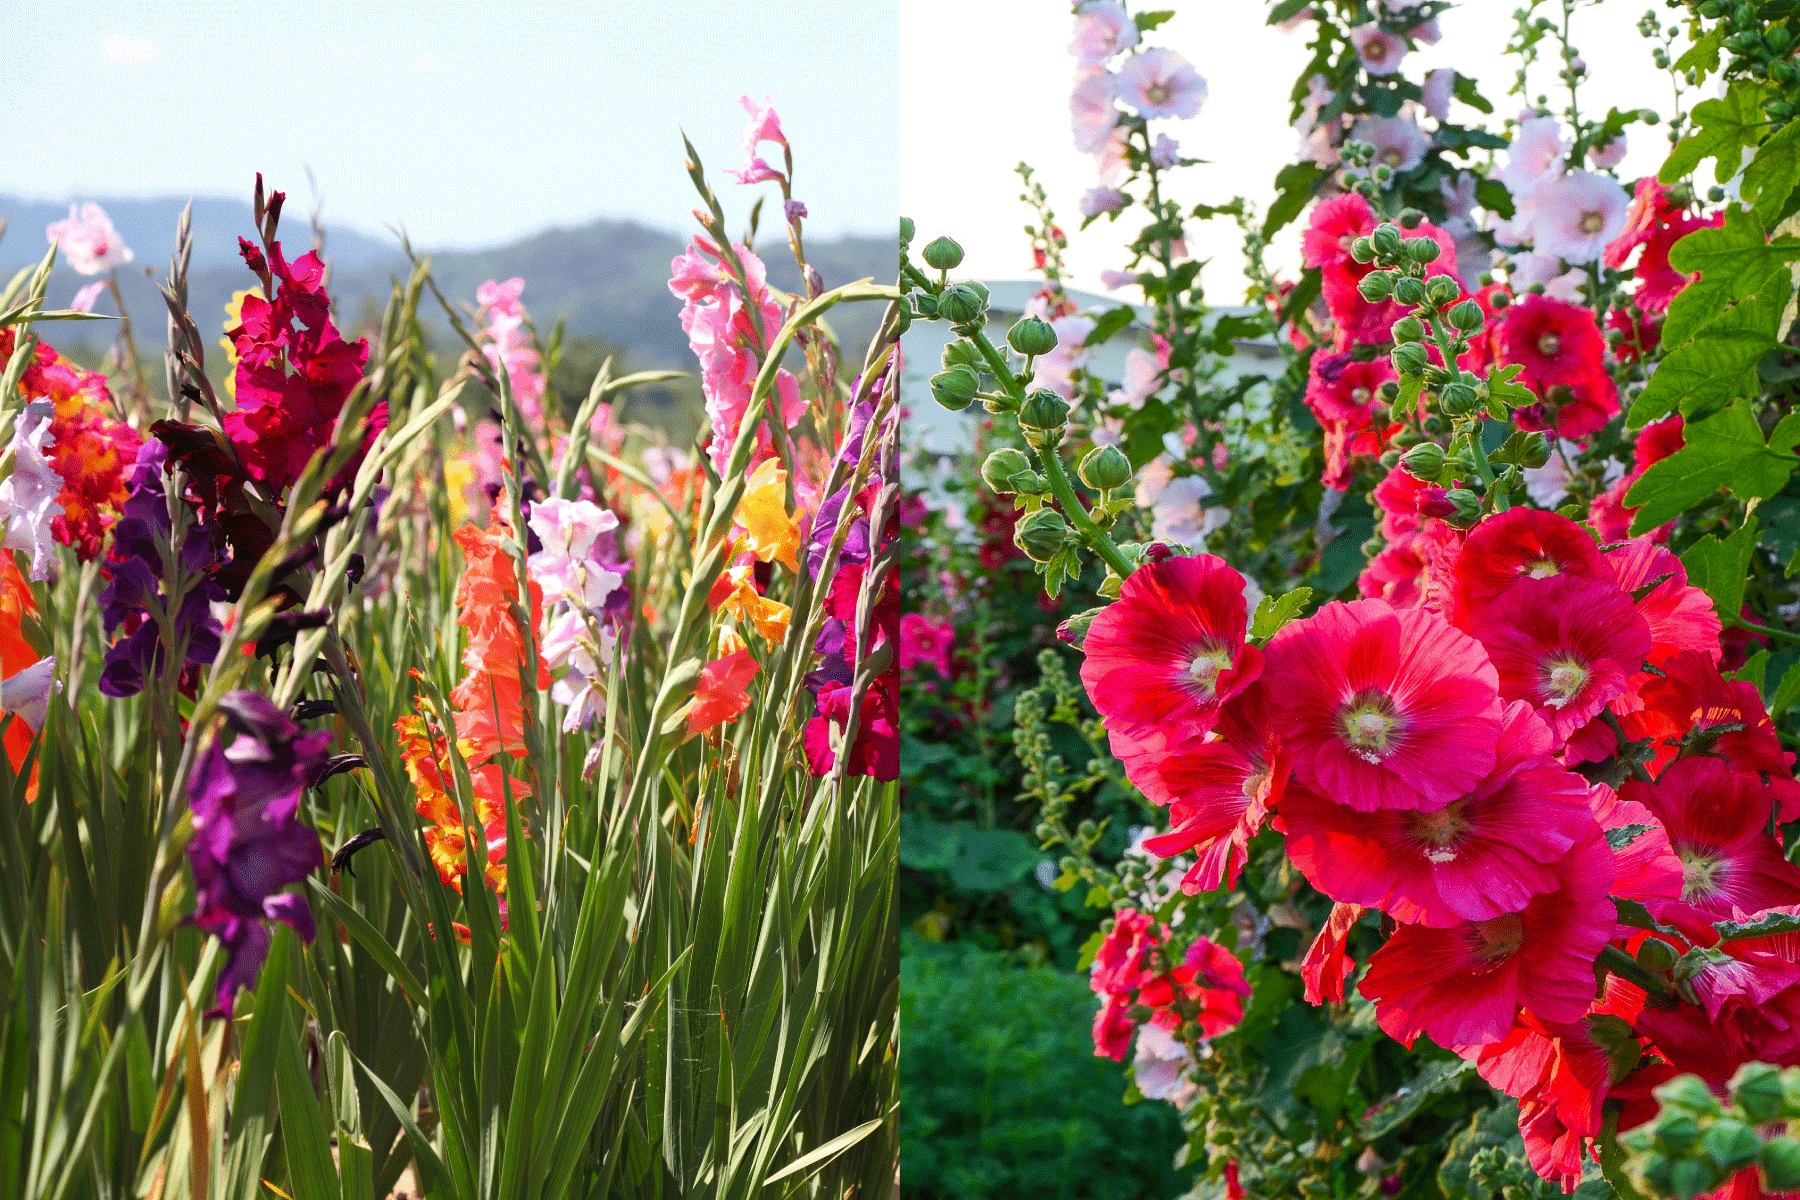 Collaged photo of a Gladiolus and Hollyhock flower blooming at the garden